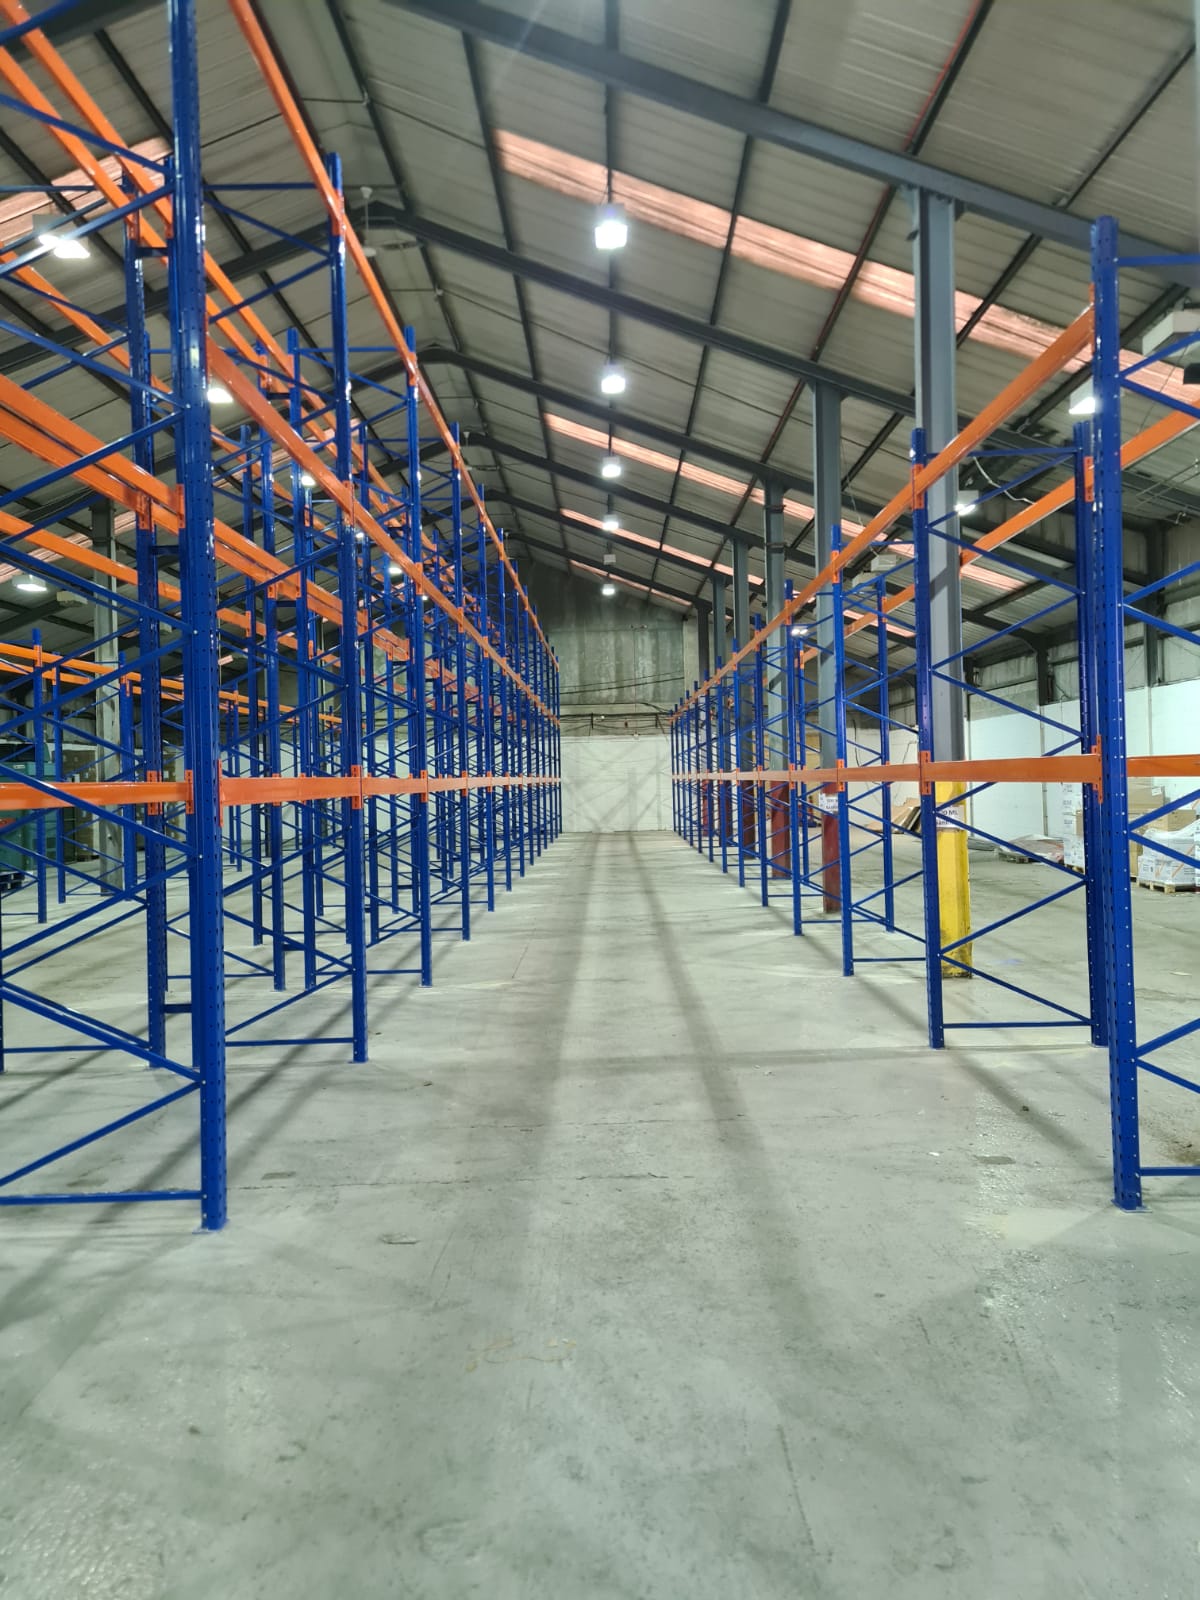 One of our latest pallet racking projects is now complete